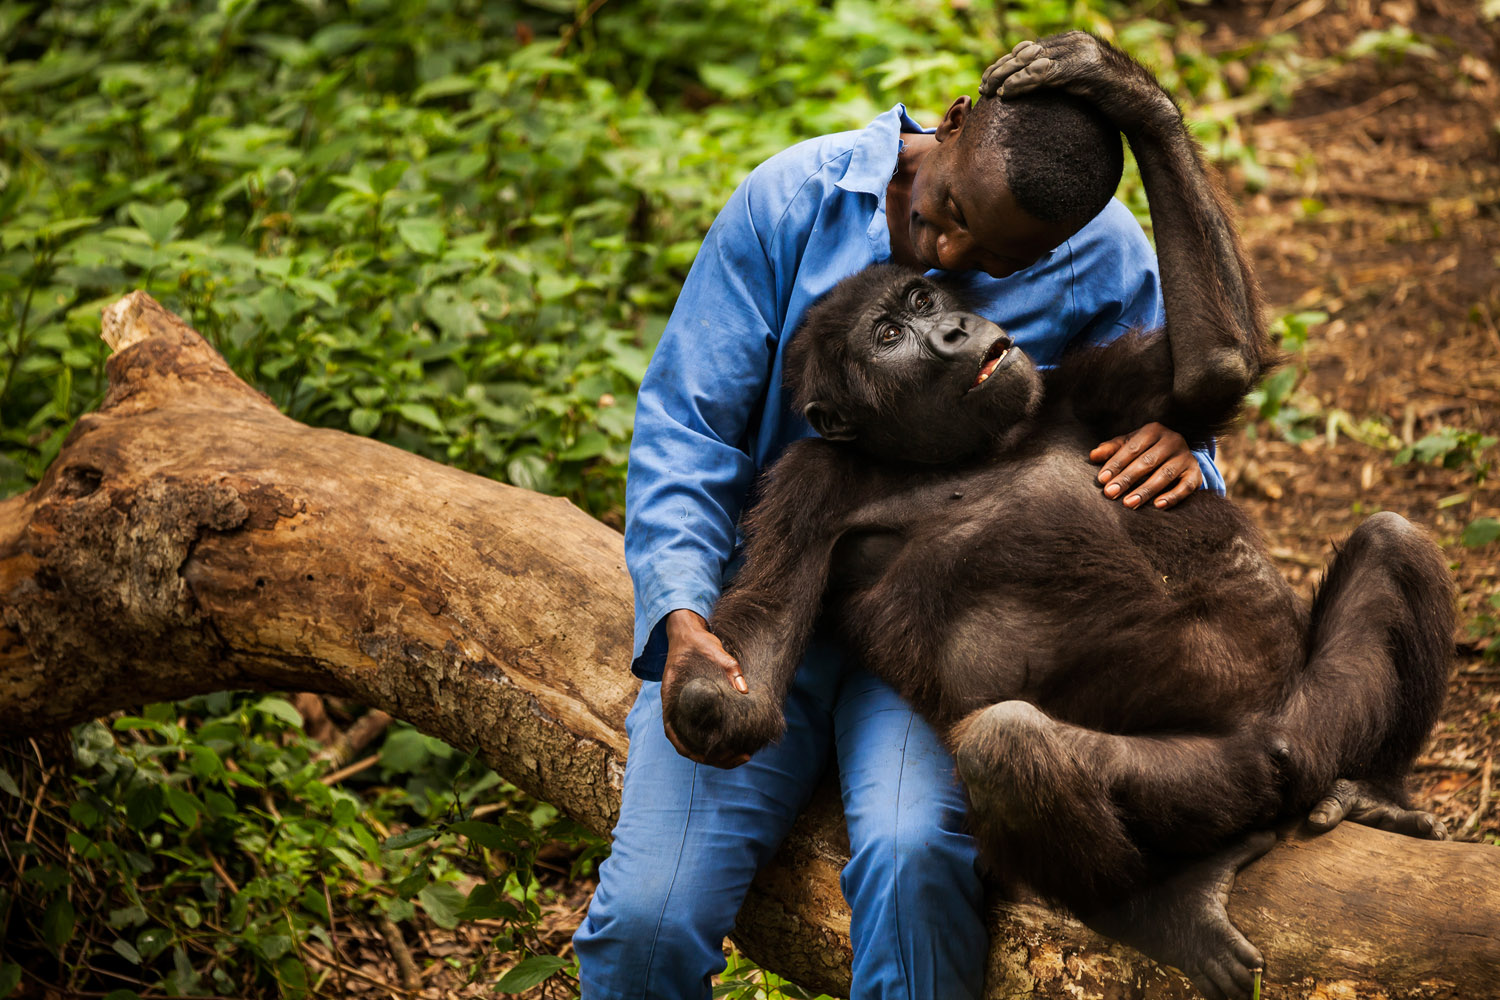 RUMANGABO, EASTERN DEMOCRATIC REPUBLIC OF CONGO, MARCH 2012: Andre, 39, a self described "gorilla mother" looks after 4 orphaned gorillas who were rescued from various horrific circumstances and brought into care by the staff of Virunga National Park, DRC, 2 March 2012. Andre thinks of these gorillas as his own children and even describes bringing his children to see them as showing them their brothers and sisters. Andre lives with the Gorillas 24/7 with the exception of a few days off to visit his own family. Andre is an ICCN Congolese Conservation ranger and has cared for orphaned and rescued gorillas since 2003. (Photo by Brent Stirton/Reportage for Getty Images.)